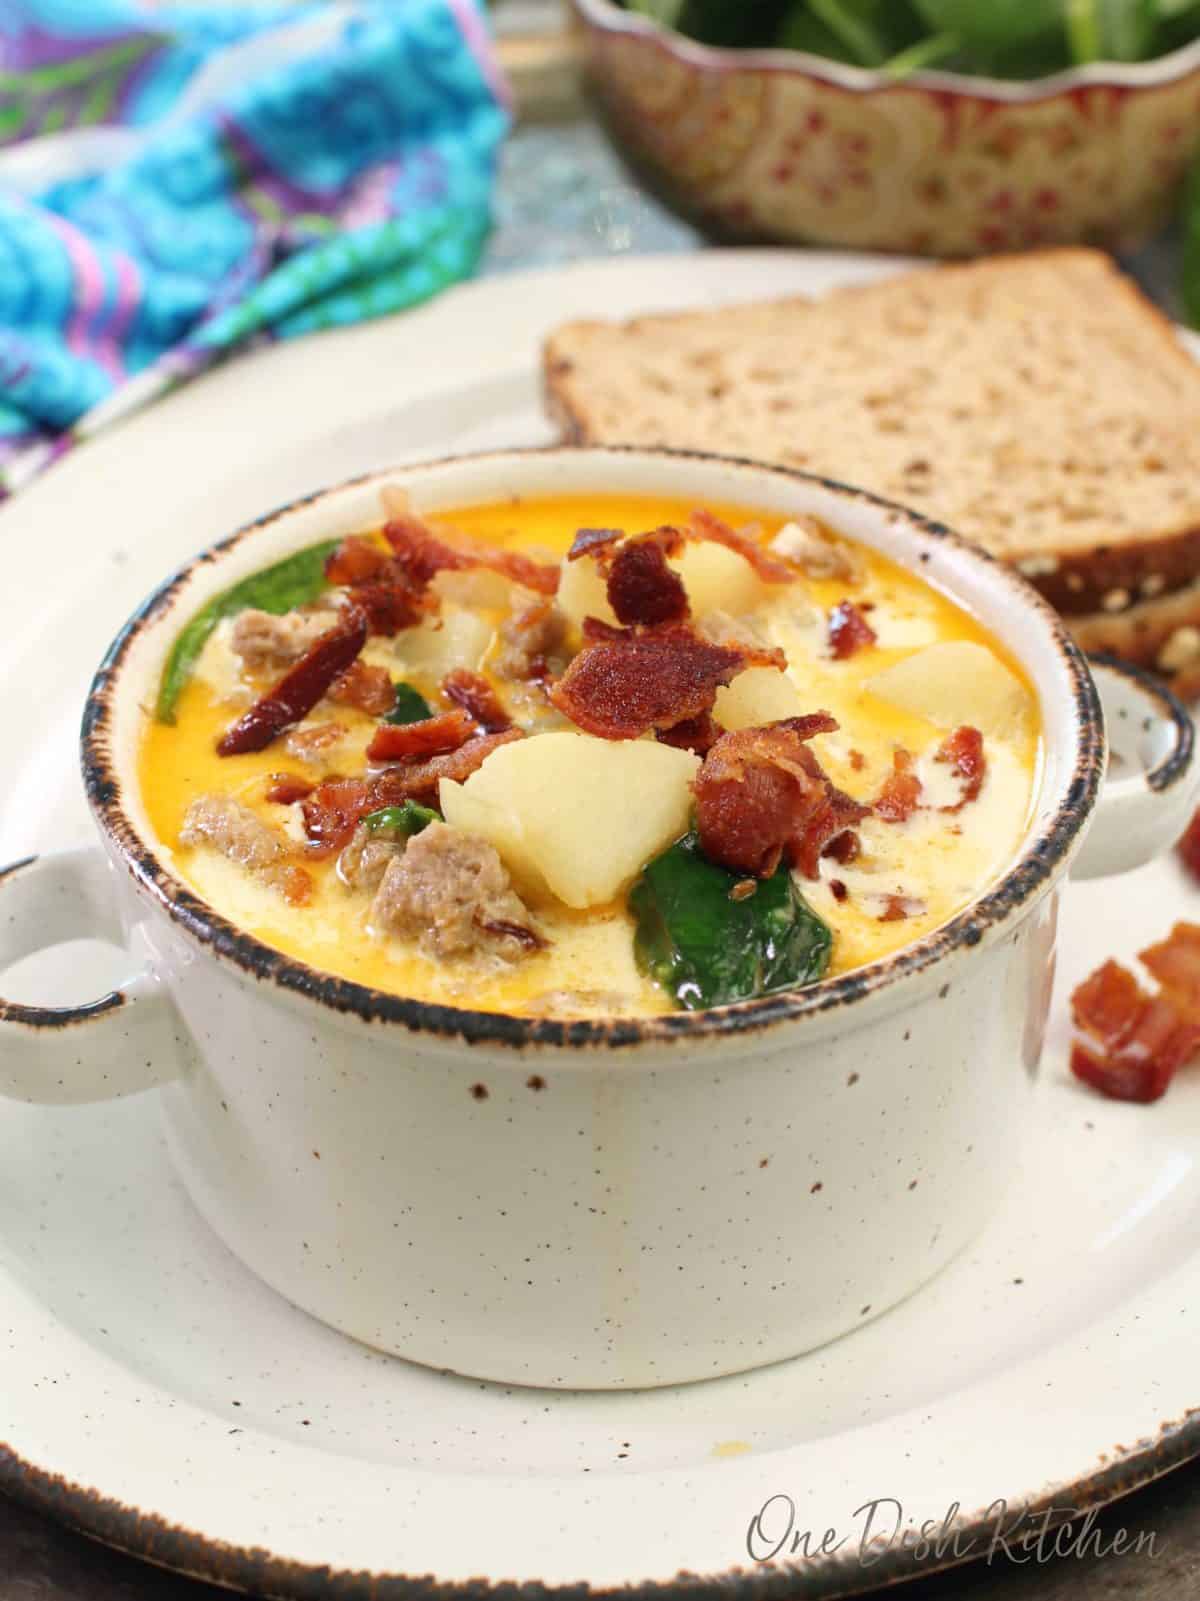 a small bowl of soup filled with potatoes, bacon, sausage and spinach on a plate next to two slices of bread.